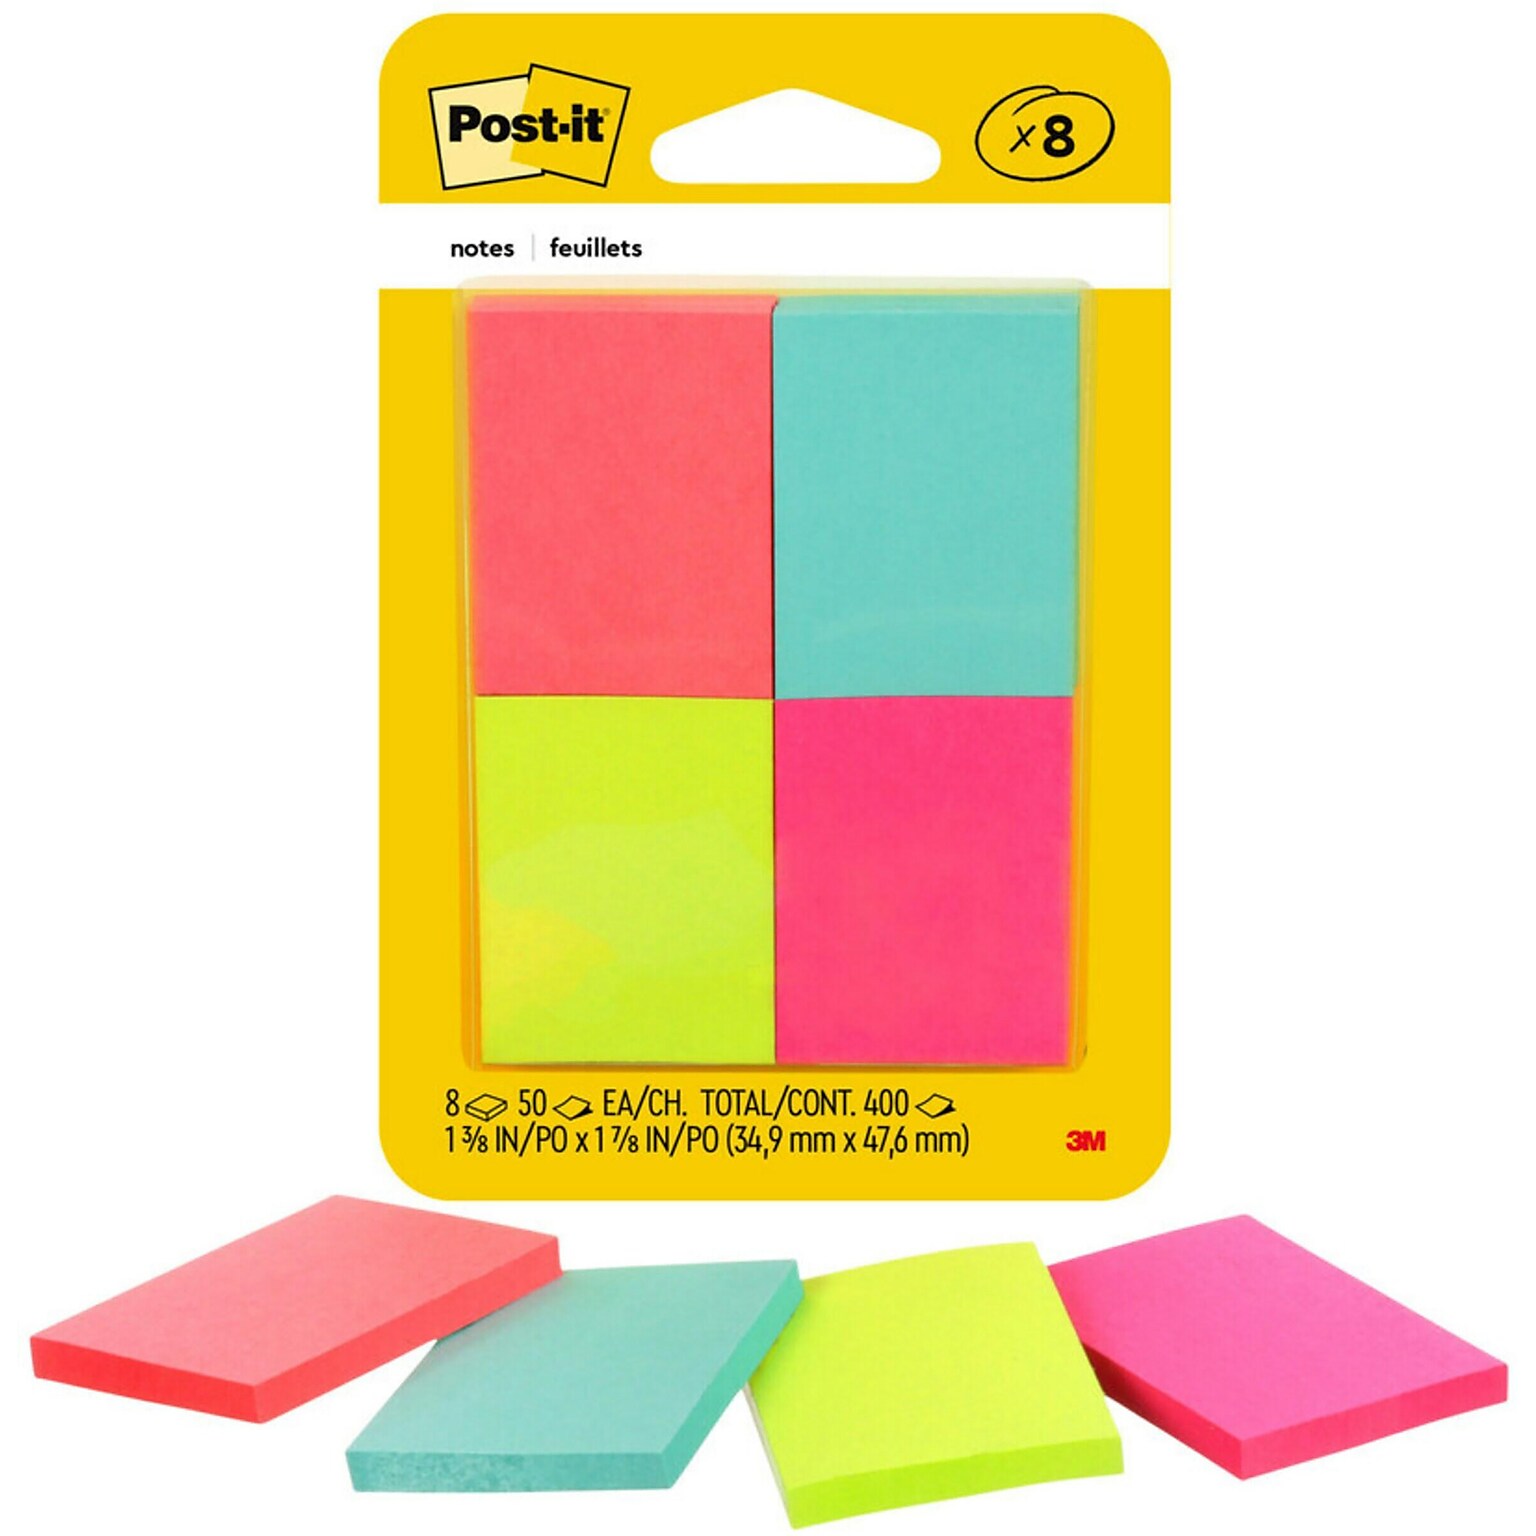 Post-it Notes, 1 3/8 x 1 7/8, Poptimistic Collection, 50 Sheet/Pad, 8 Pads/Pack (653-8AF)